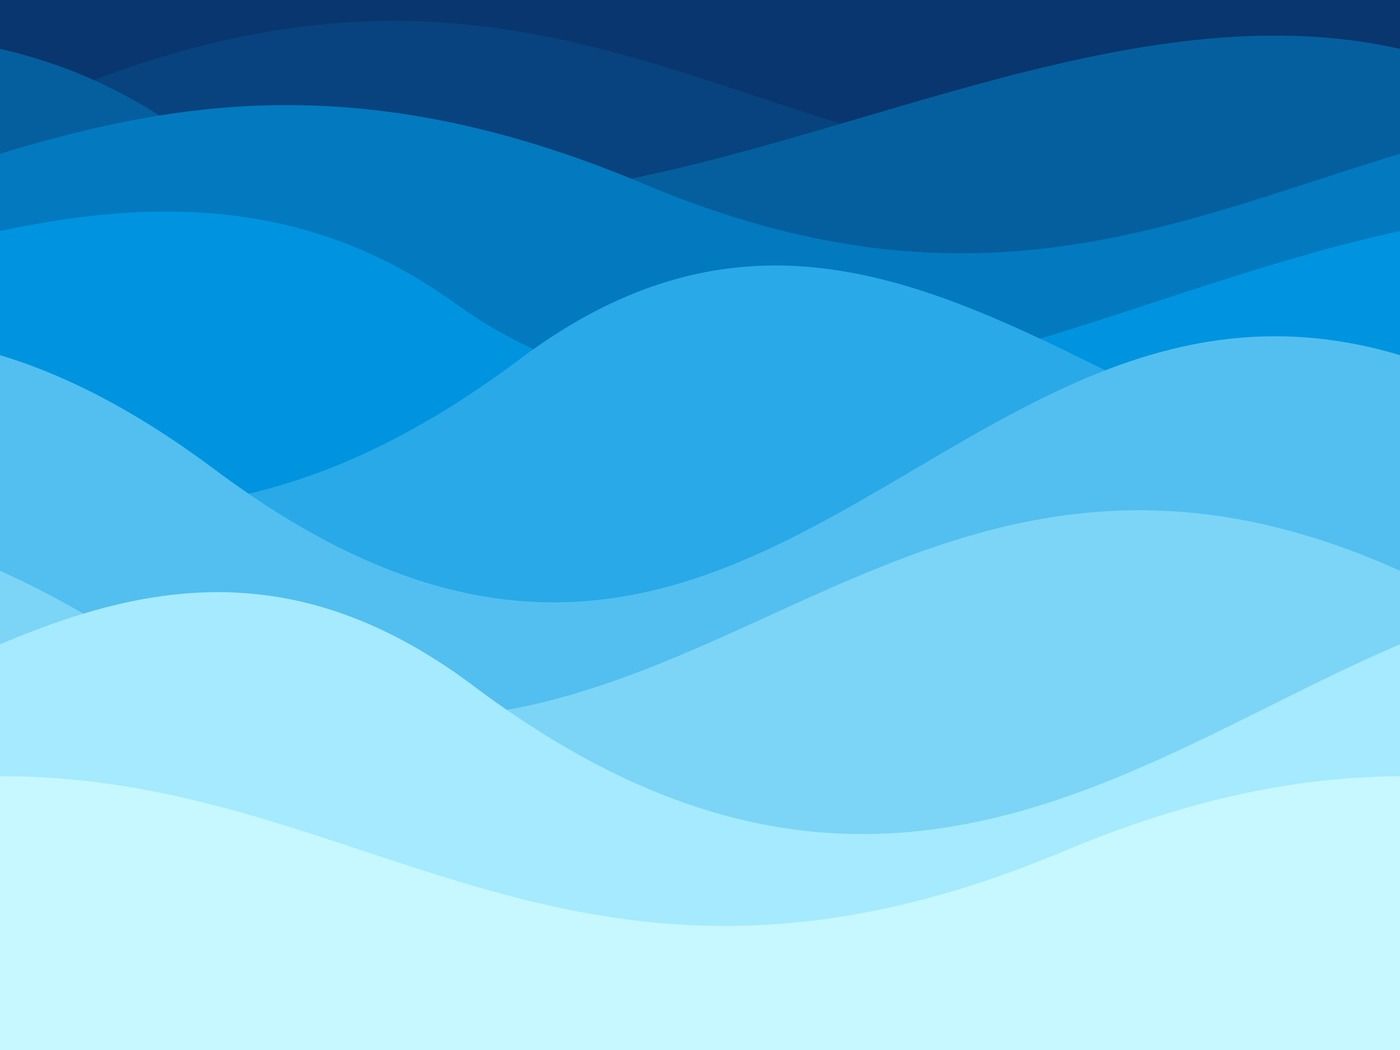 Blue waves pattern. Summer lake wave, water flow abstract vector